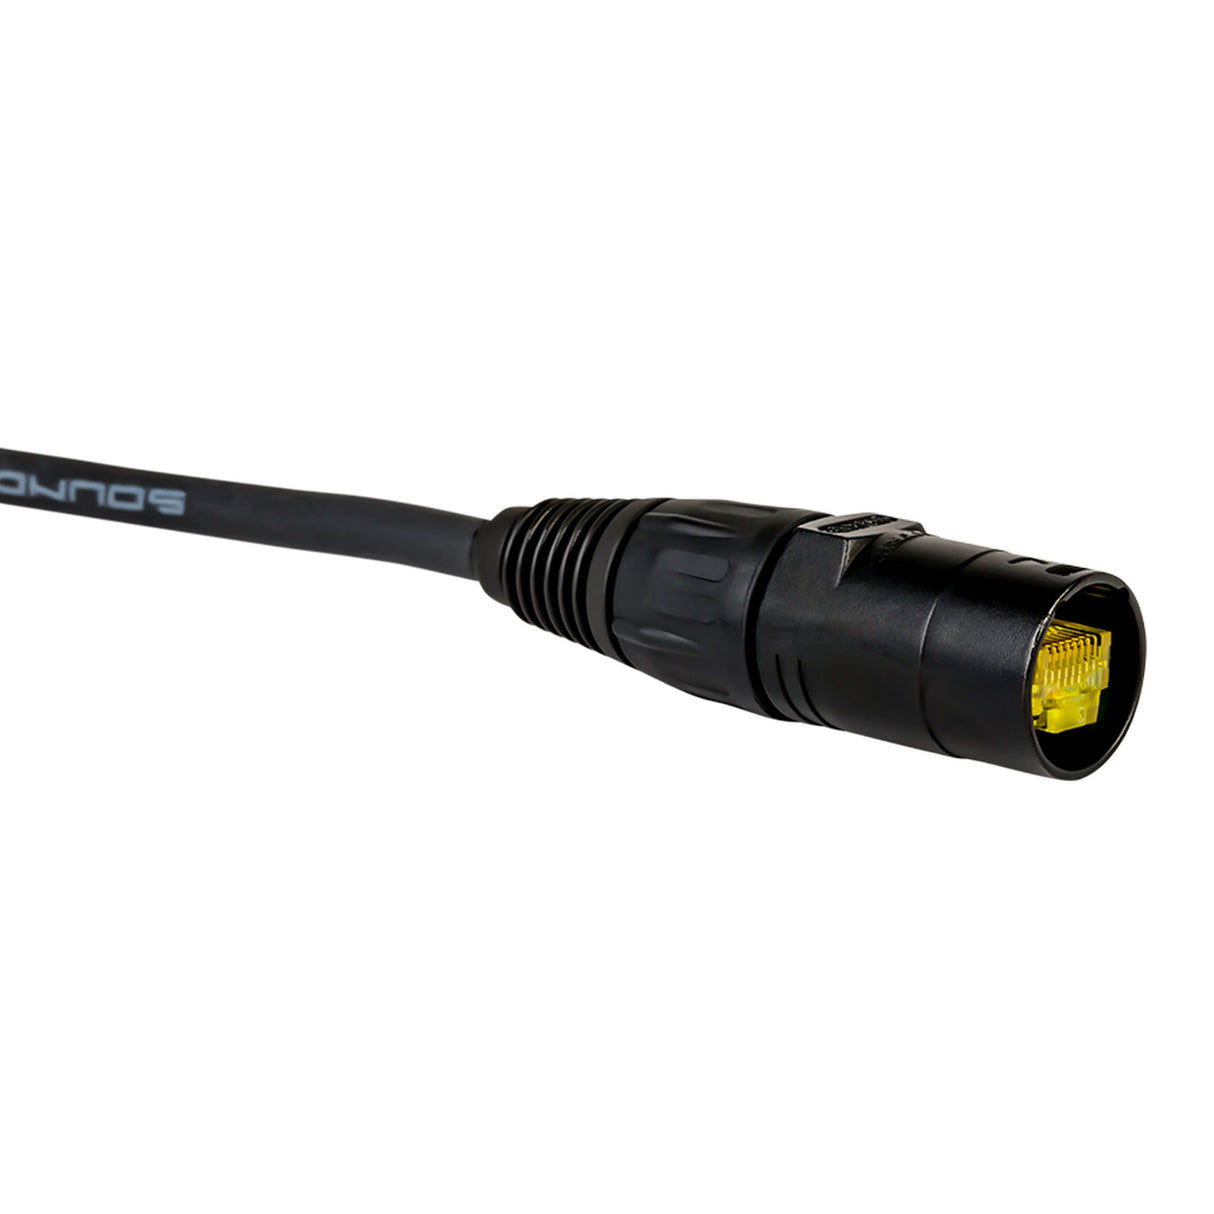 SoundTools SuperCAT etherCON to etherCON CAT5e Cable, Black, 30 Meter